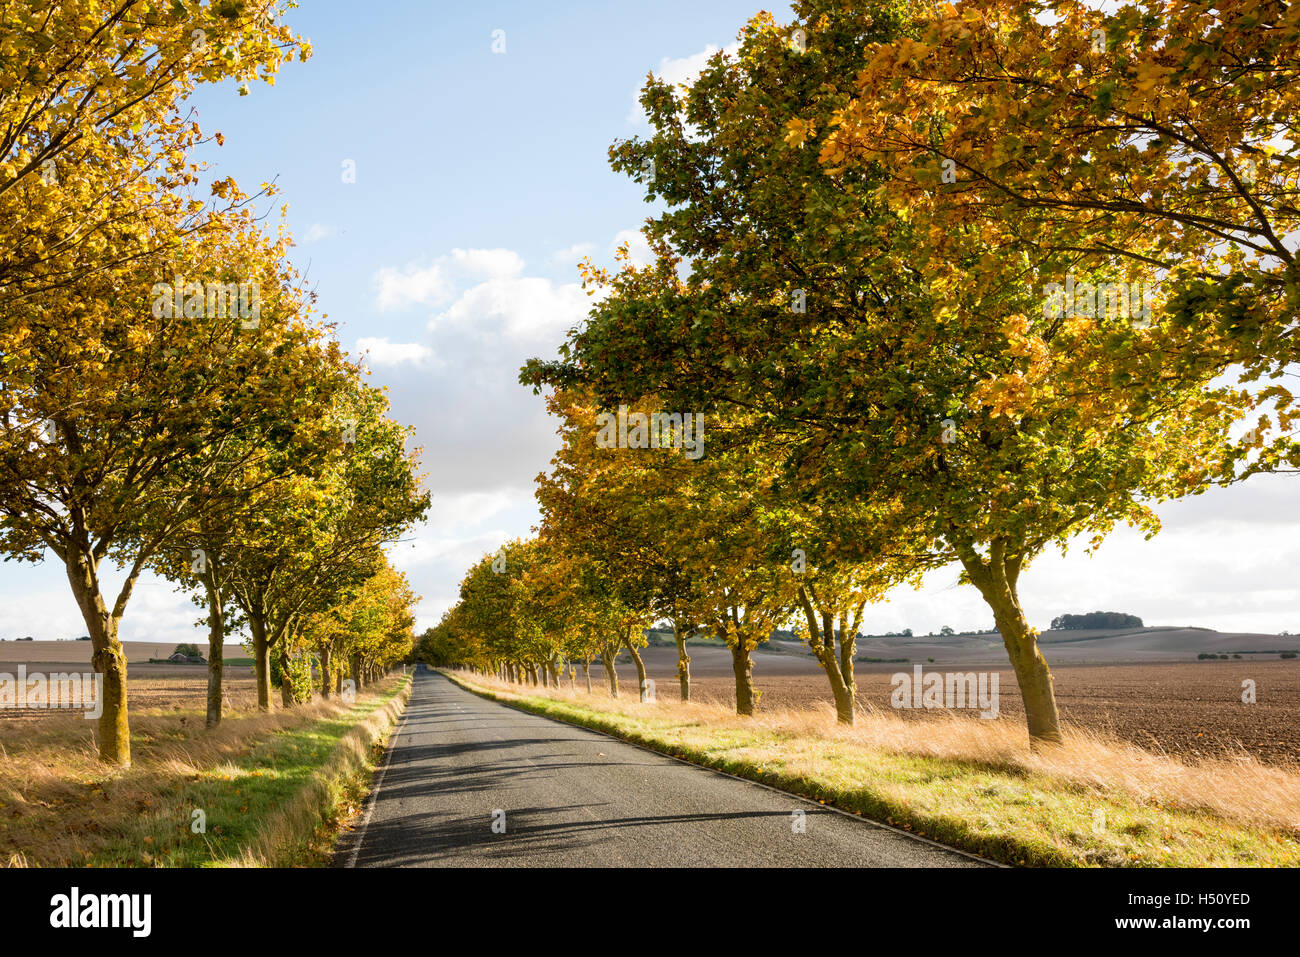 Heydon, South Cambridgeshire, UK. 18th Oct, 2016. A tree lined road glows in autumn colours on a sunny, blustery autumn day. Temperatures have fallen during the week and there is the possibility of frost later in the week as the autumn season develops. Credit:  Julian Eales/Alamy Live News Stock Photo